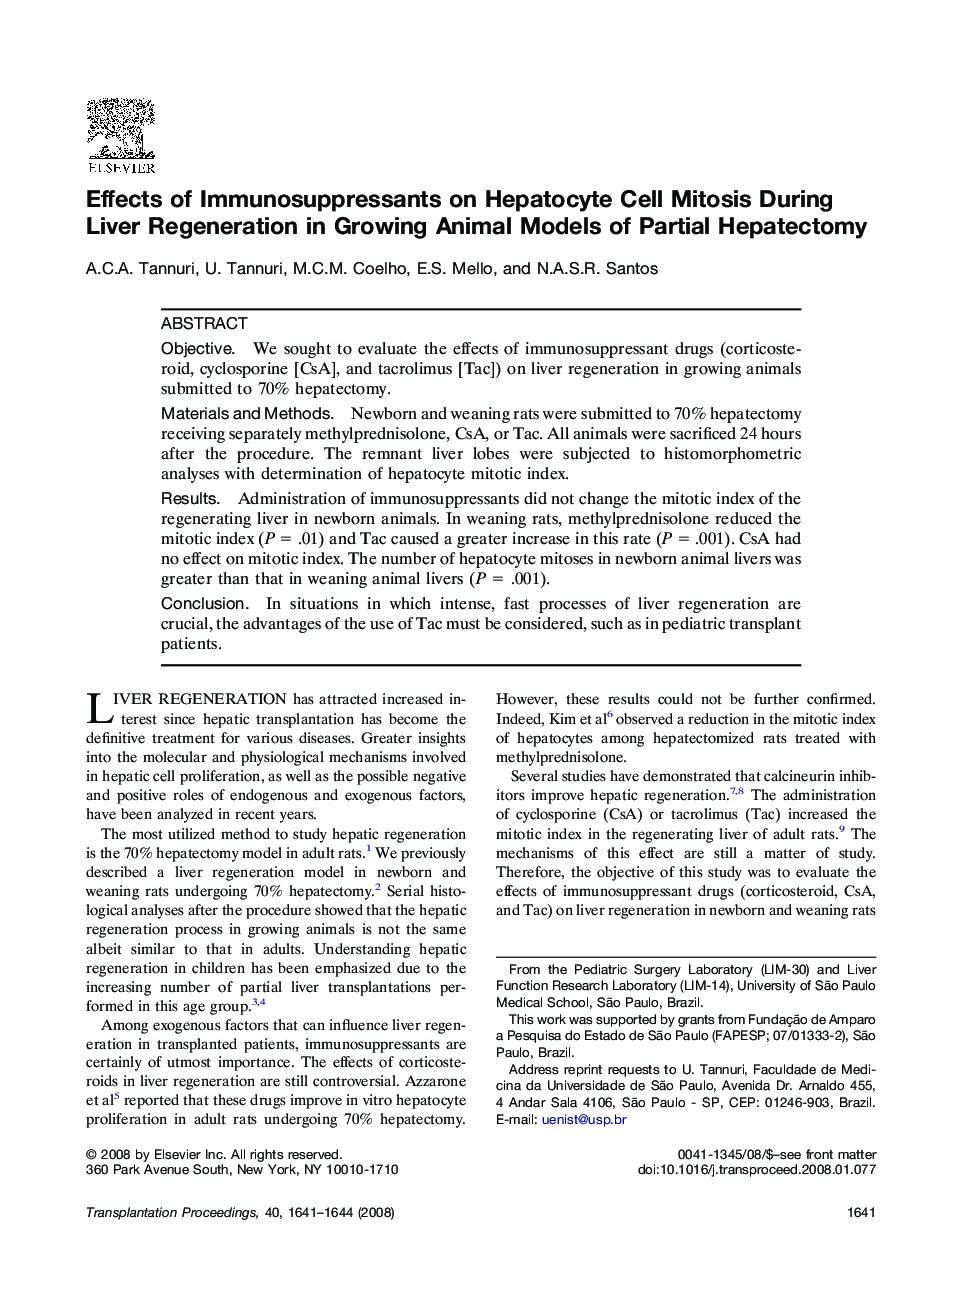 Effects of Immunosuppressants on Hepatocyte Cell Mitosis During Liver Regeneration in Growing Animal Models of Partial Hepatectomy 